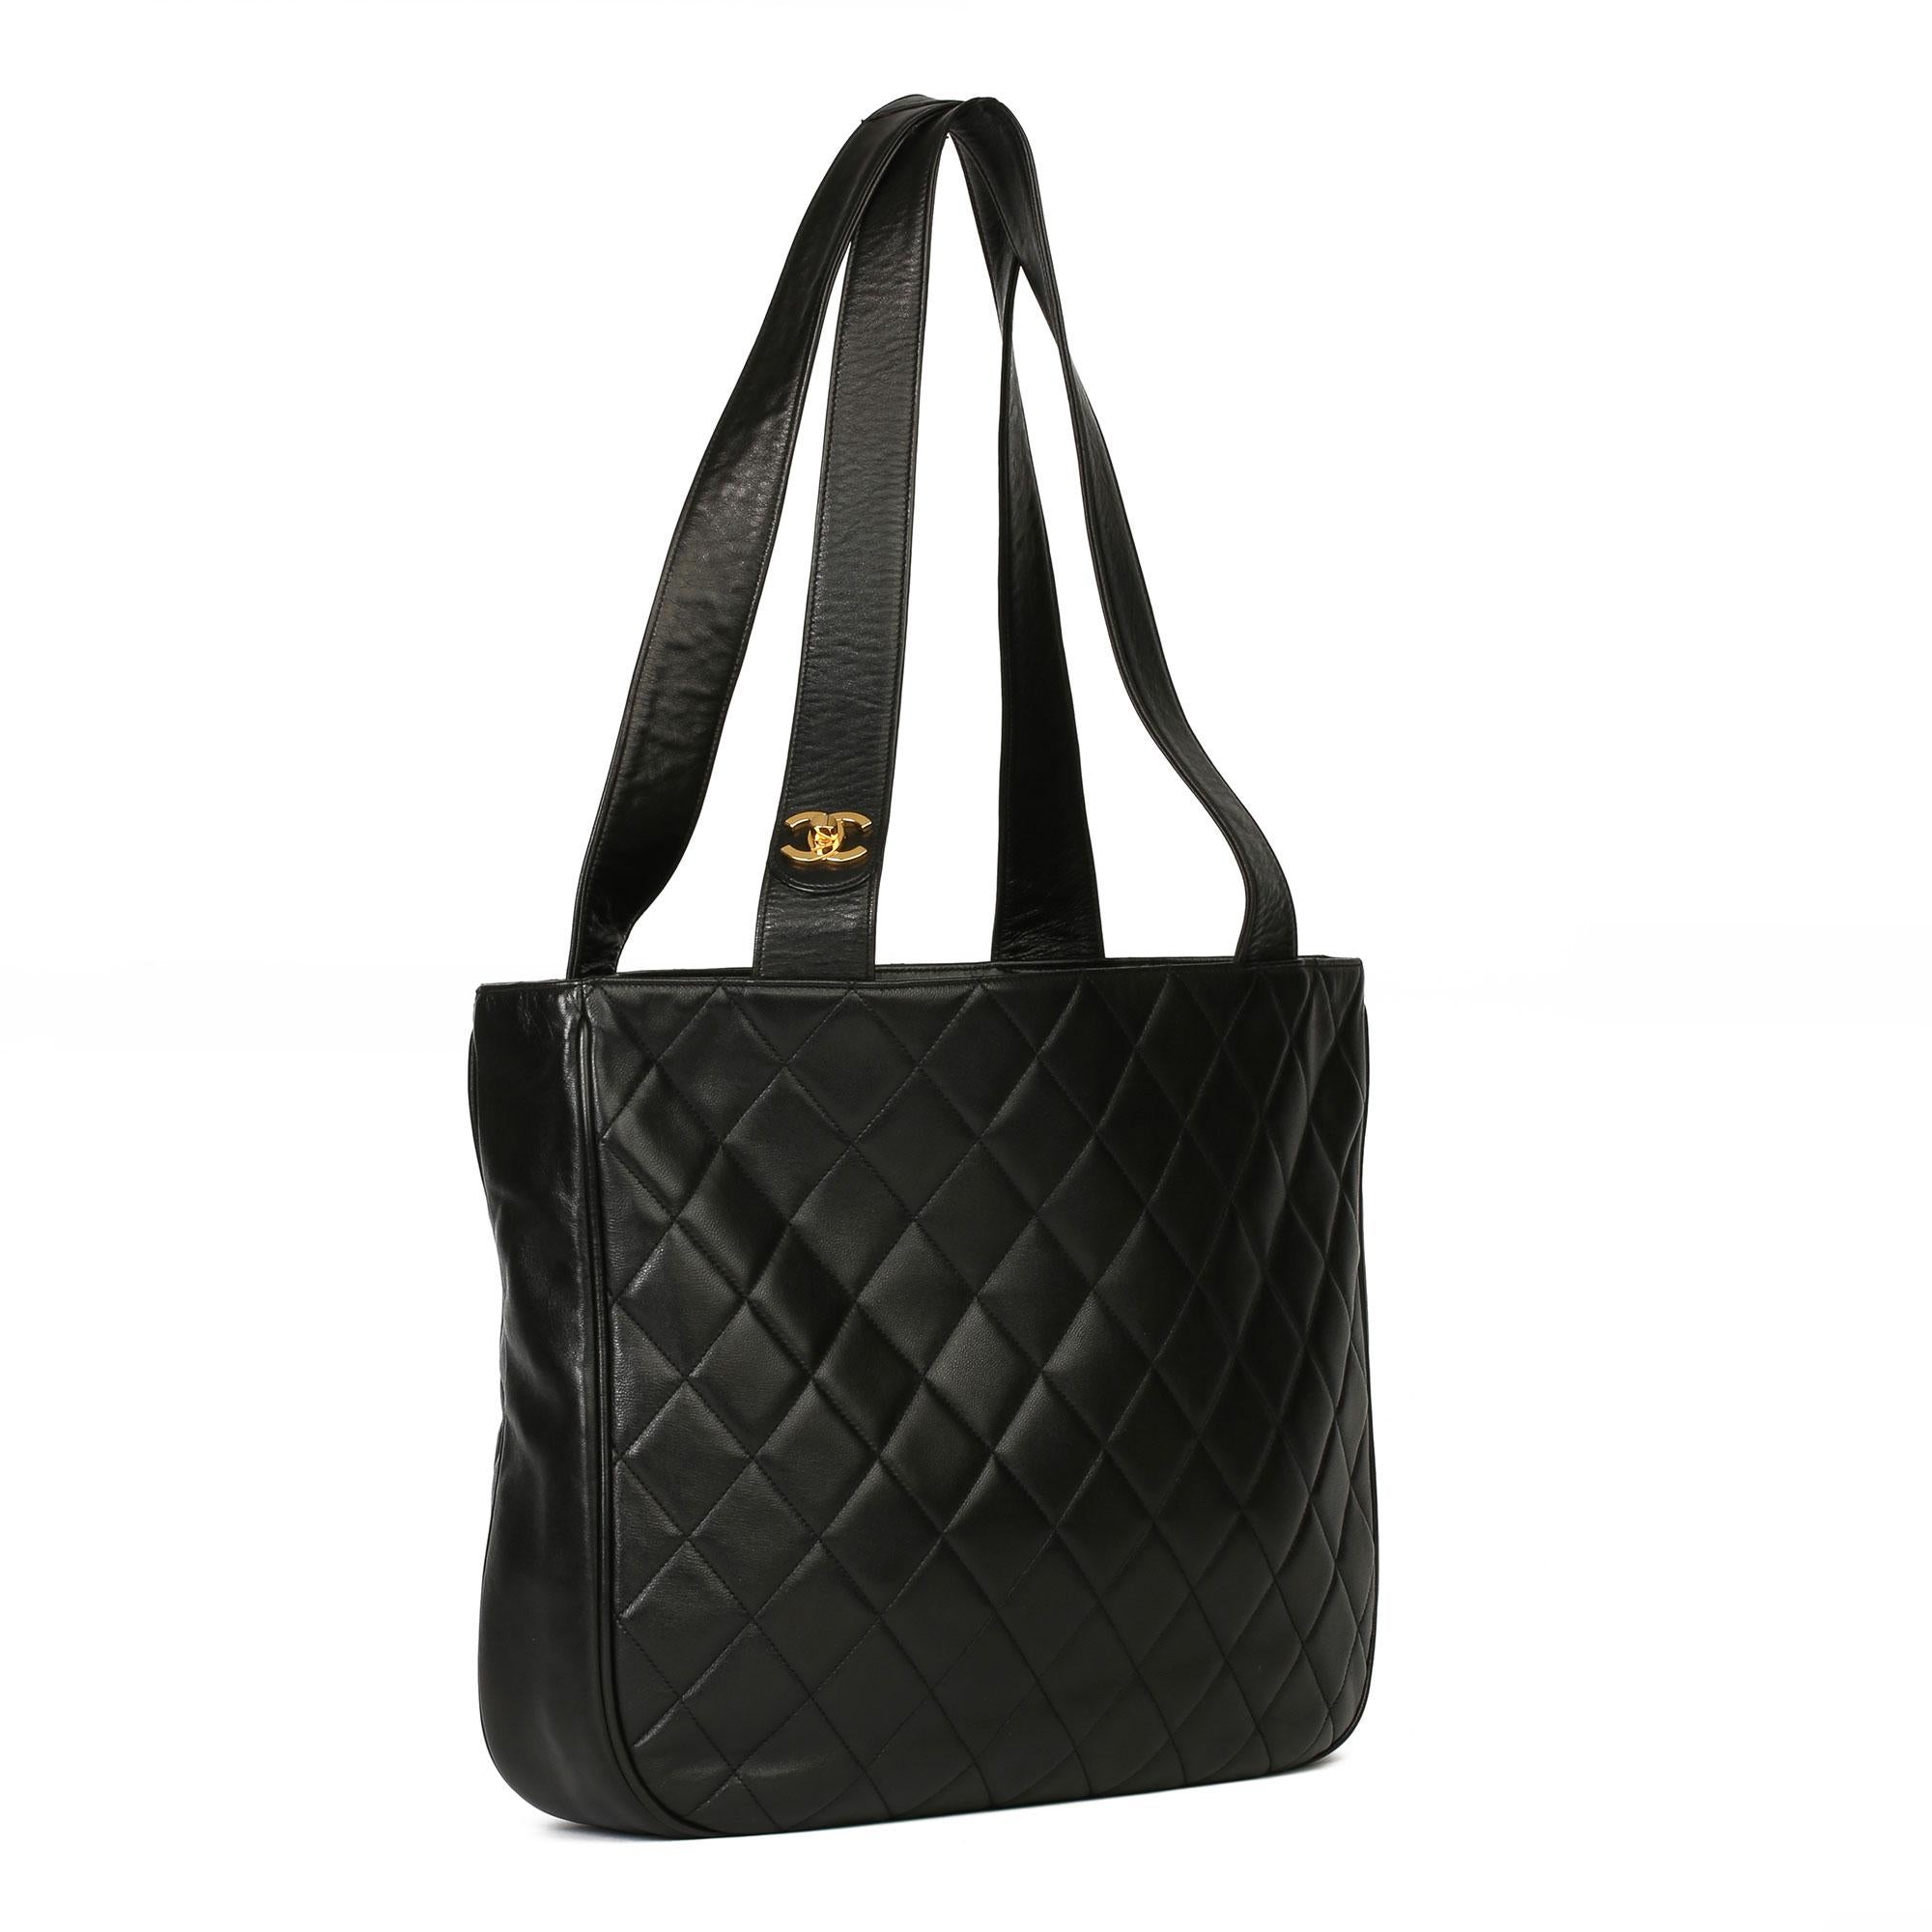 CHANEL
 Black Quilted Lambskin Vintage Classic Shoulder Tote

Xupes Reference: HB3917
Serial Number: 3666797
Age (Circa): 1996
Accompanied By: Authenticity Card
Authenticity Details: Authenticity Card, Serial Sticker (Made in Italy) 
Gender: